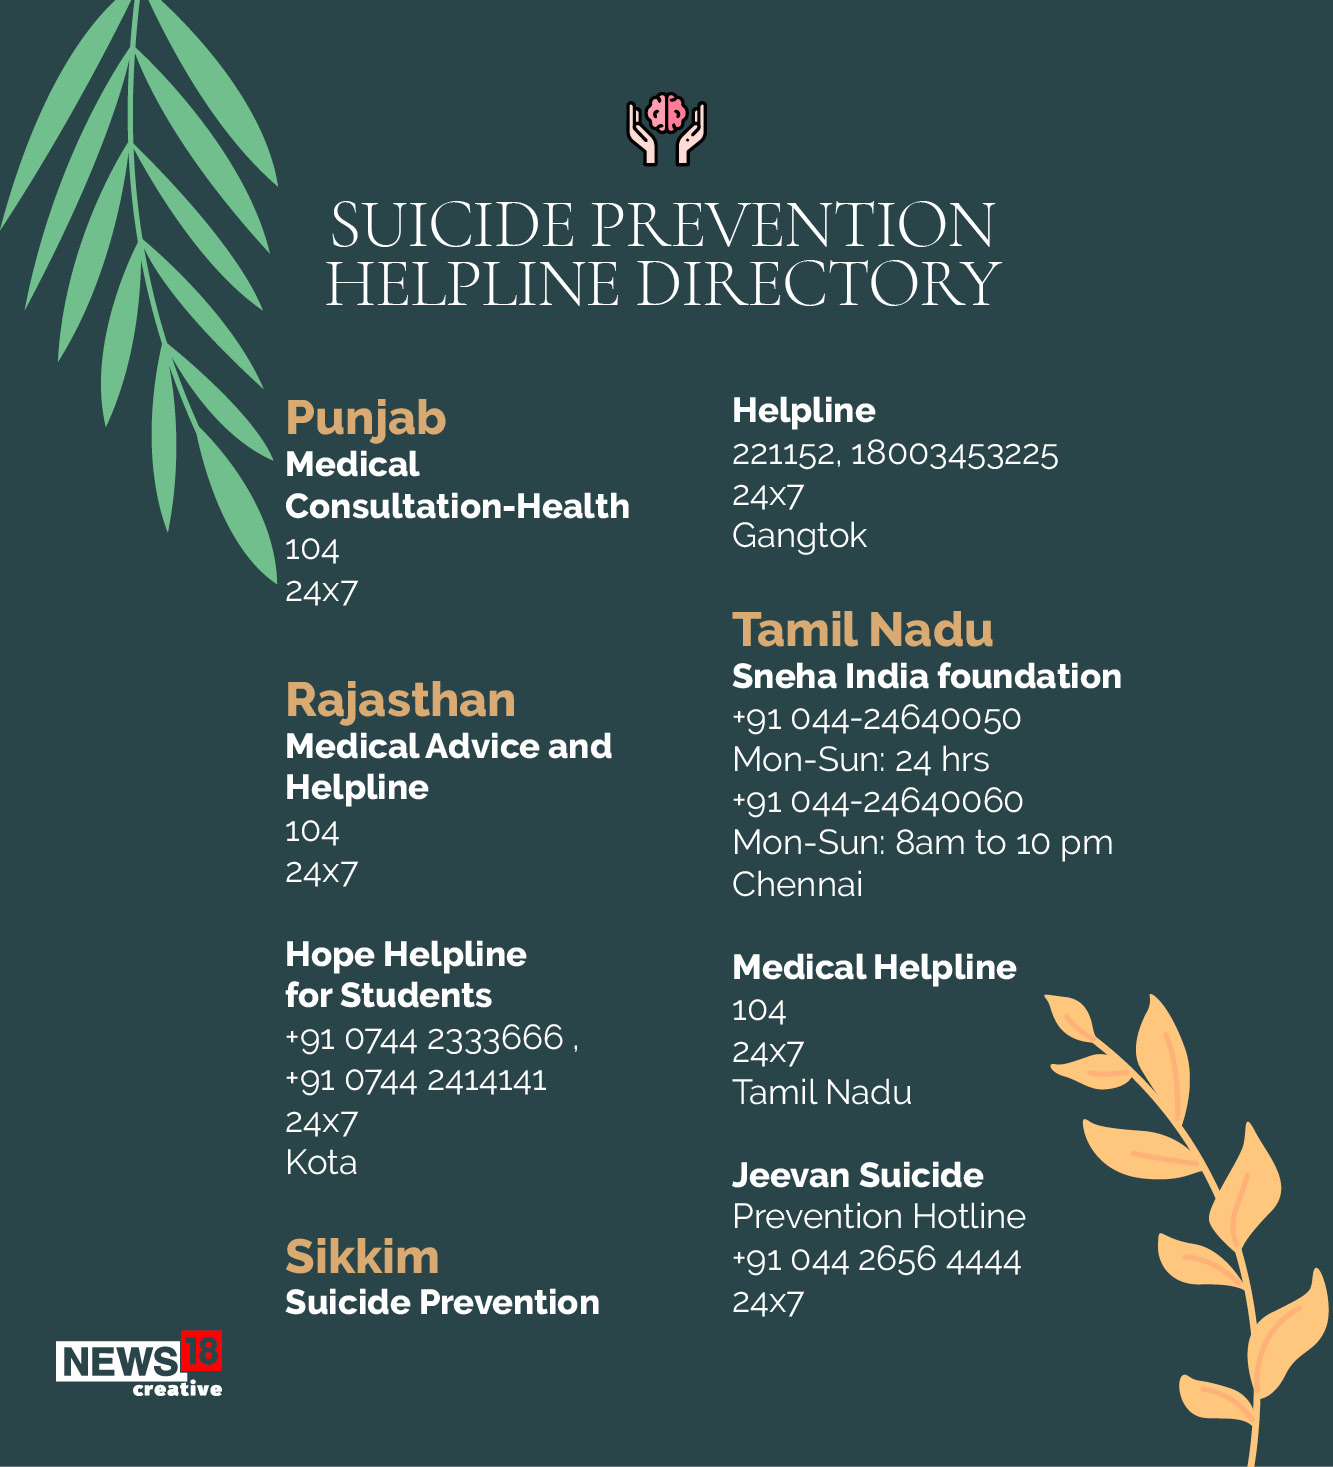 Suicide prevention: When to seek help and who to call